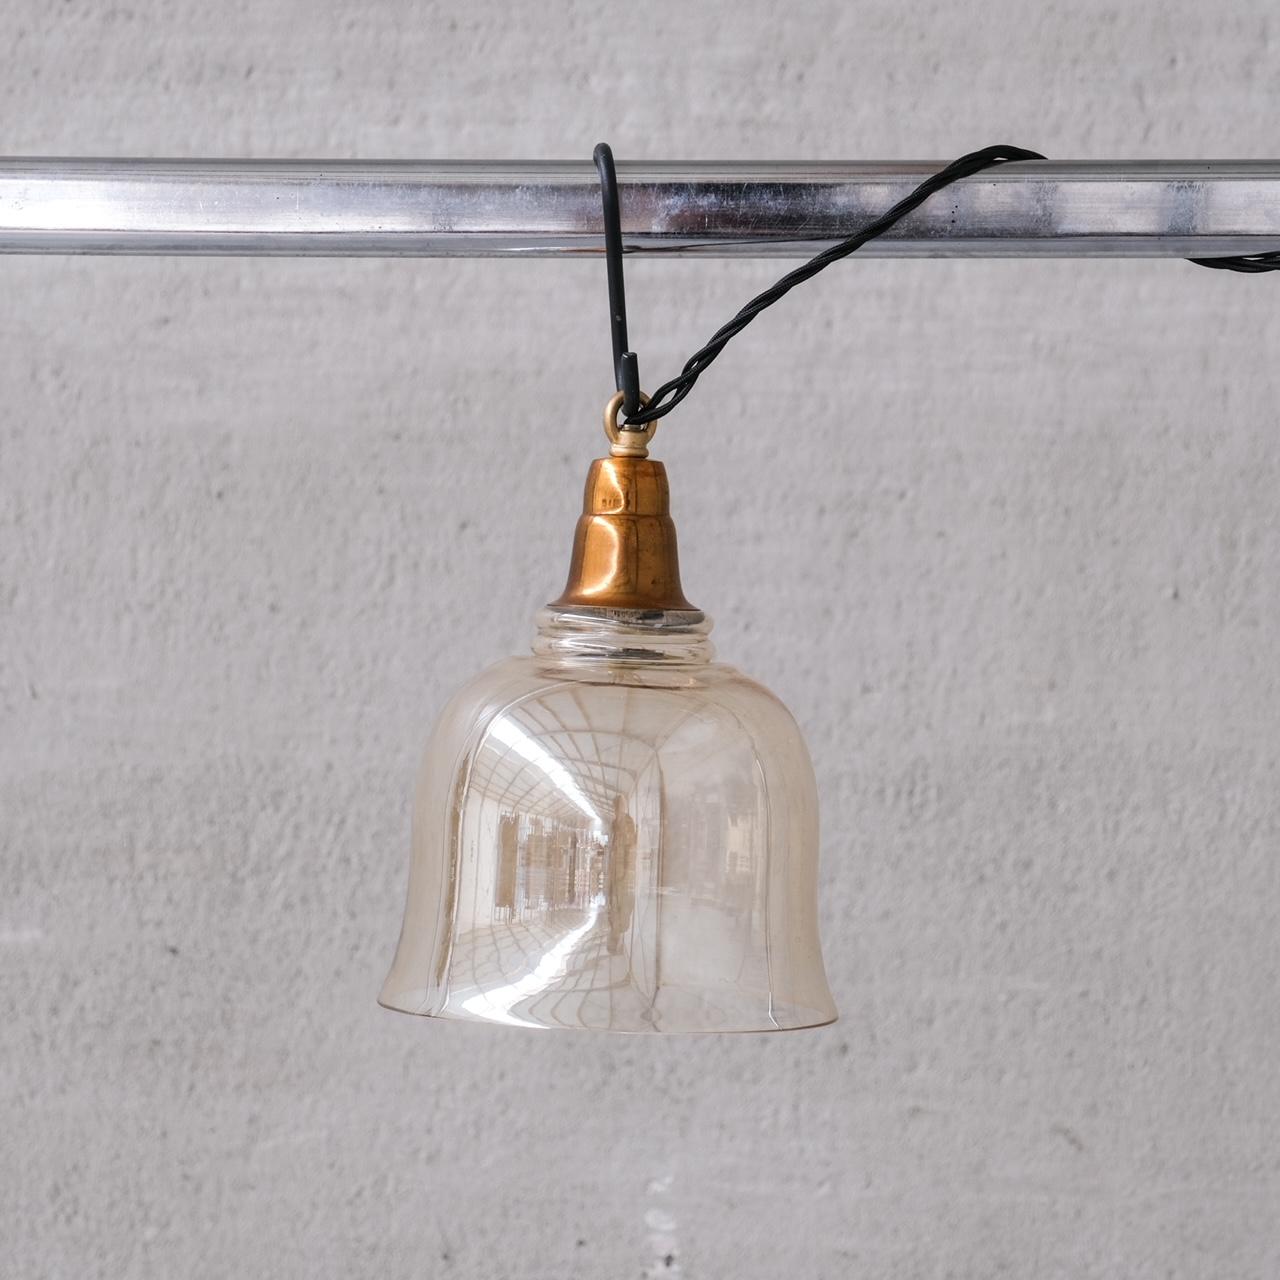 Brass slightly smoked glass pendant lights in bell shaped form.

Open bases.

France, c1960s.

5 available at the time of listing.

PRICED AND SOLD INDIVIDUALLY.

Re-wired and PAT tested.

No chain or ceiling rose was retained, we can recommend